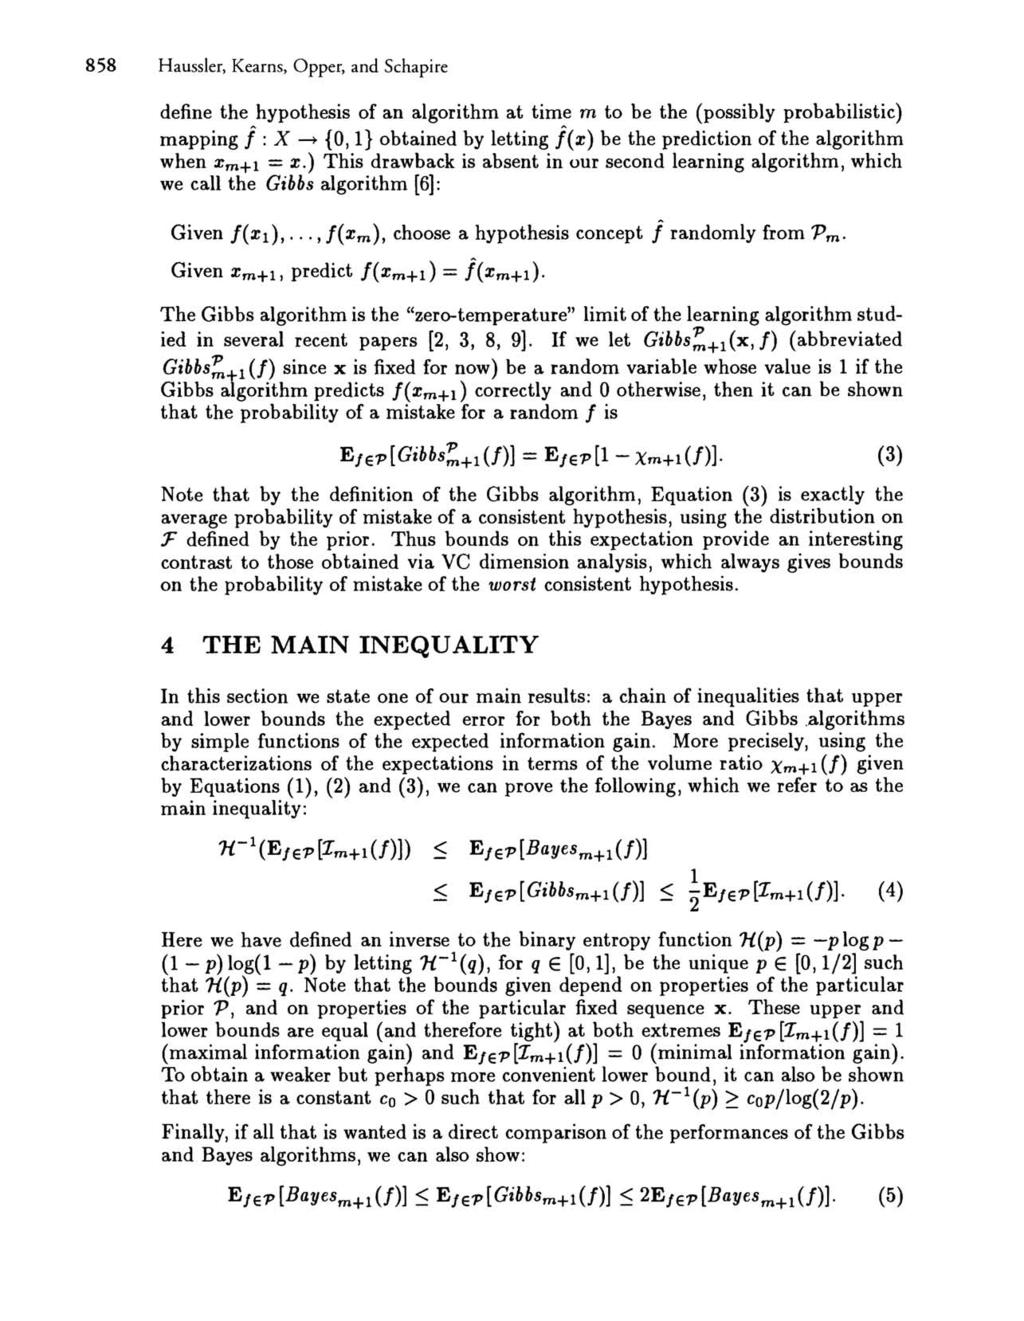 858 Haussler, Kearns, Opper, and Schapire define the hypothesis of an algorith at tie to be the (possibly probabilistic) apping j : X -+ {O, 1} obtained by letting j(x) be the prediction of the